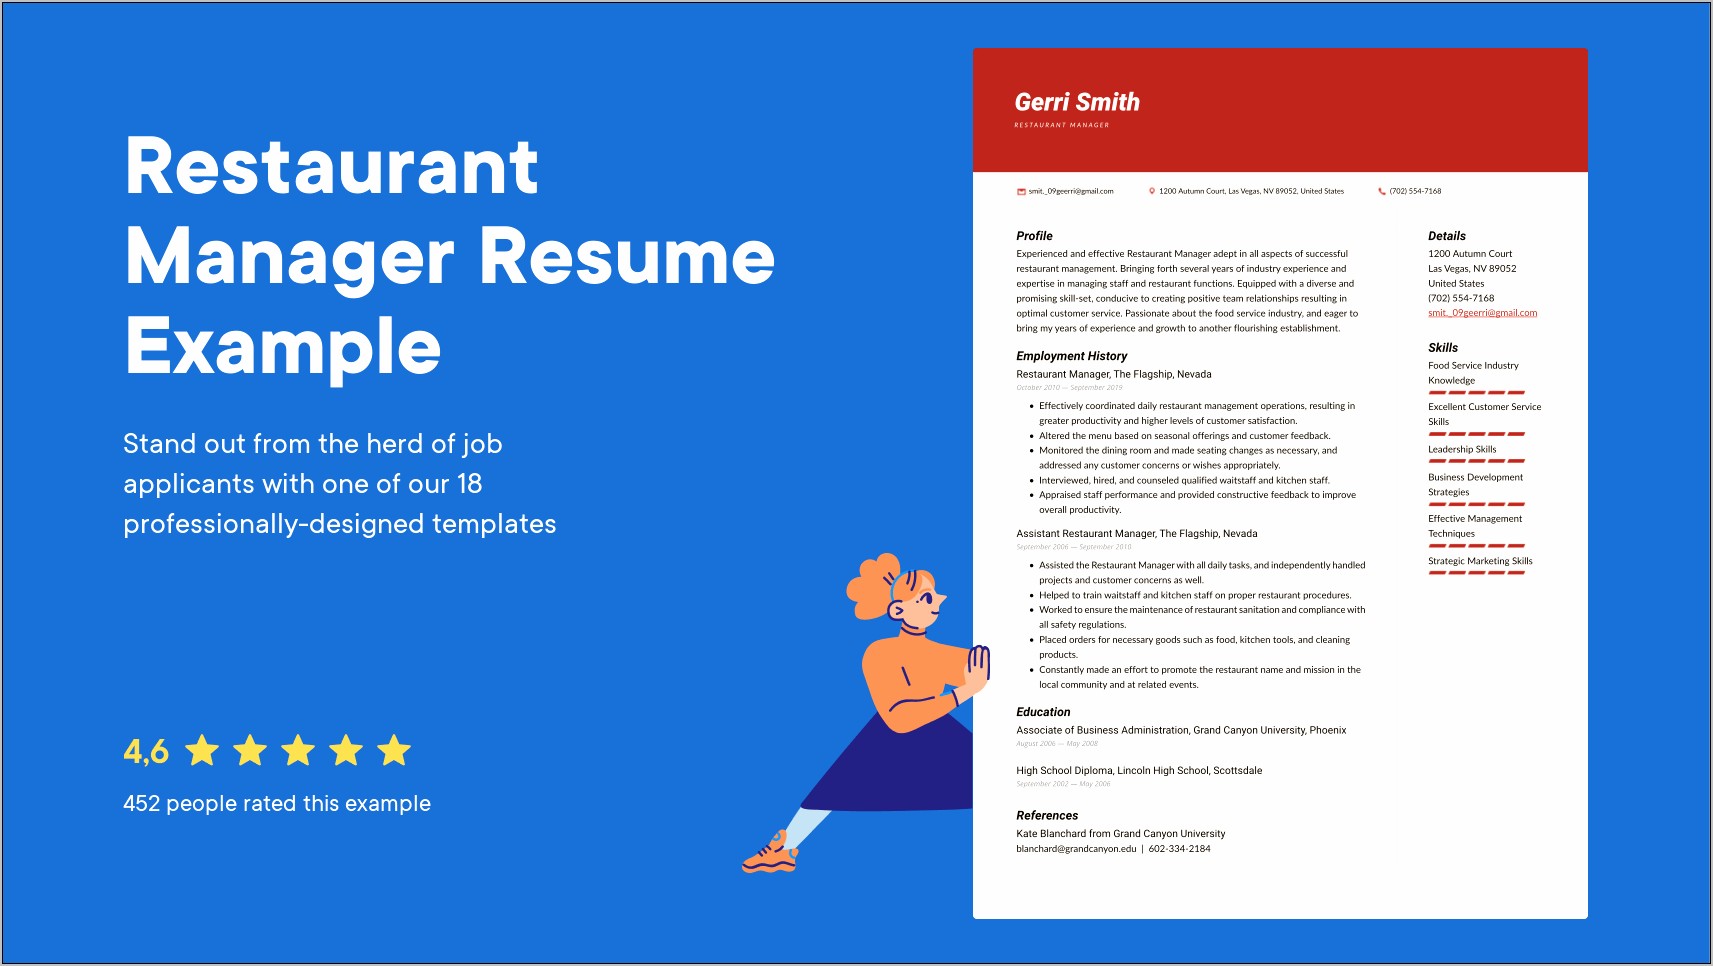 Resume Examples For Resturant Manager